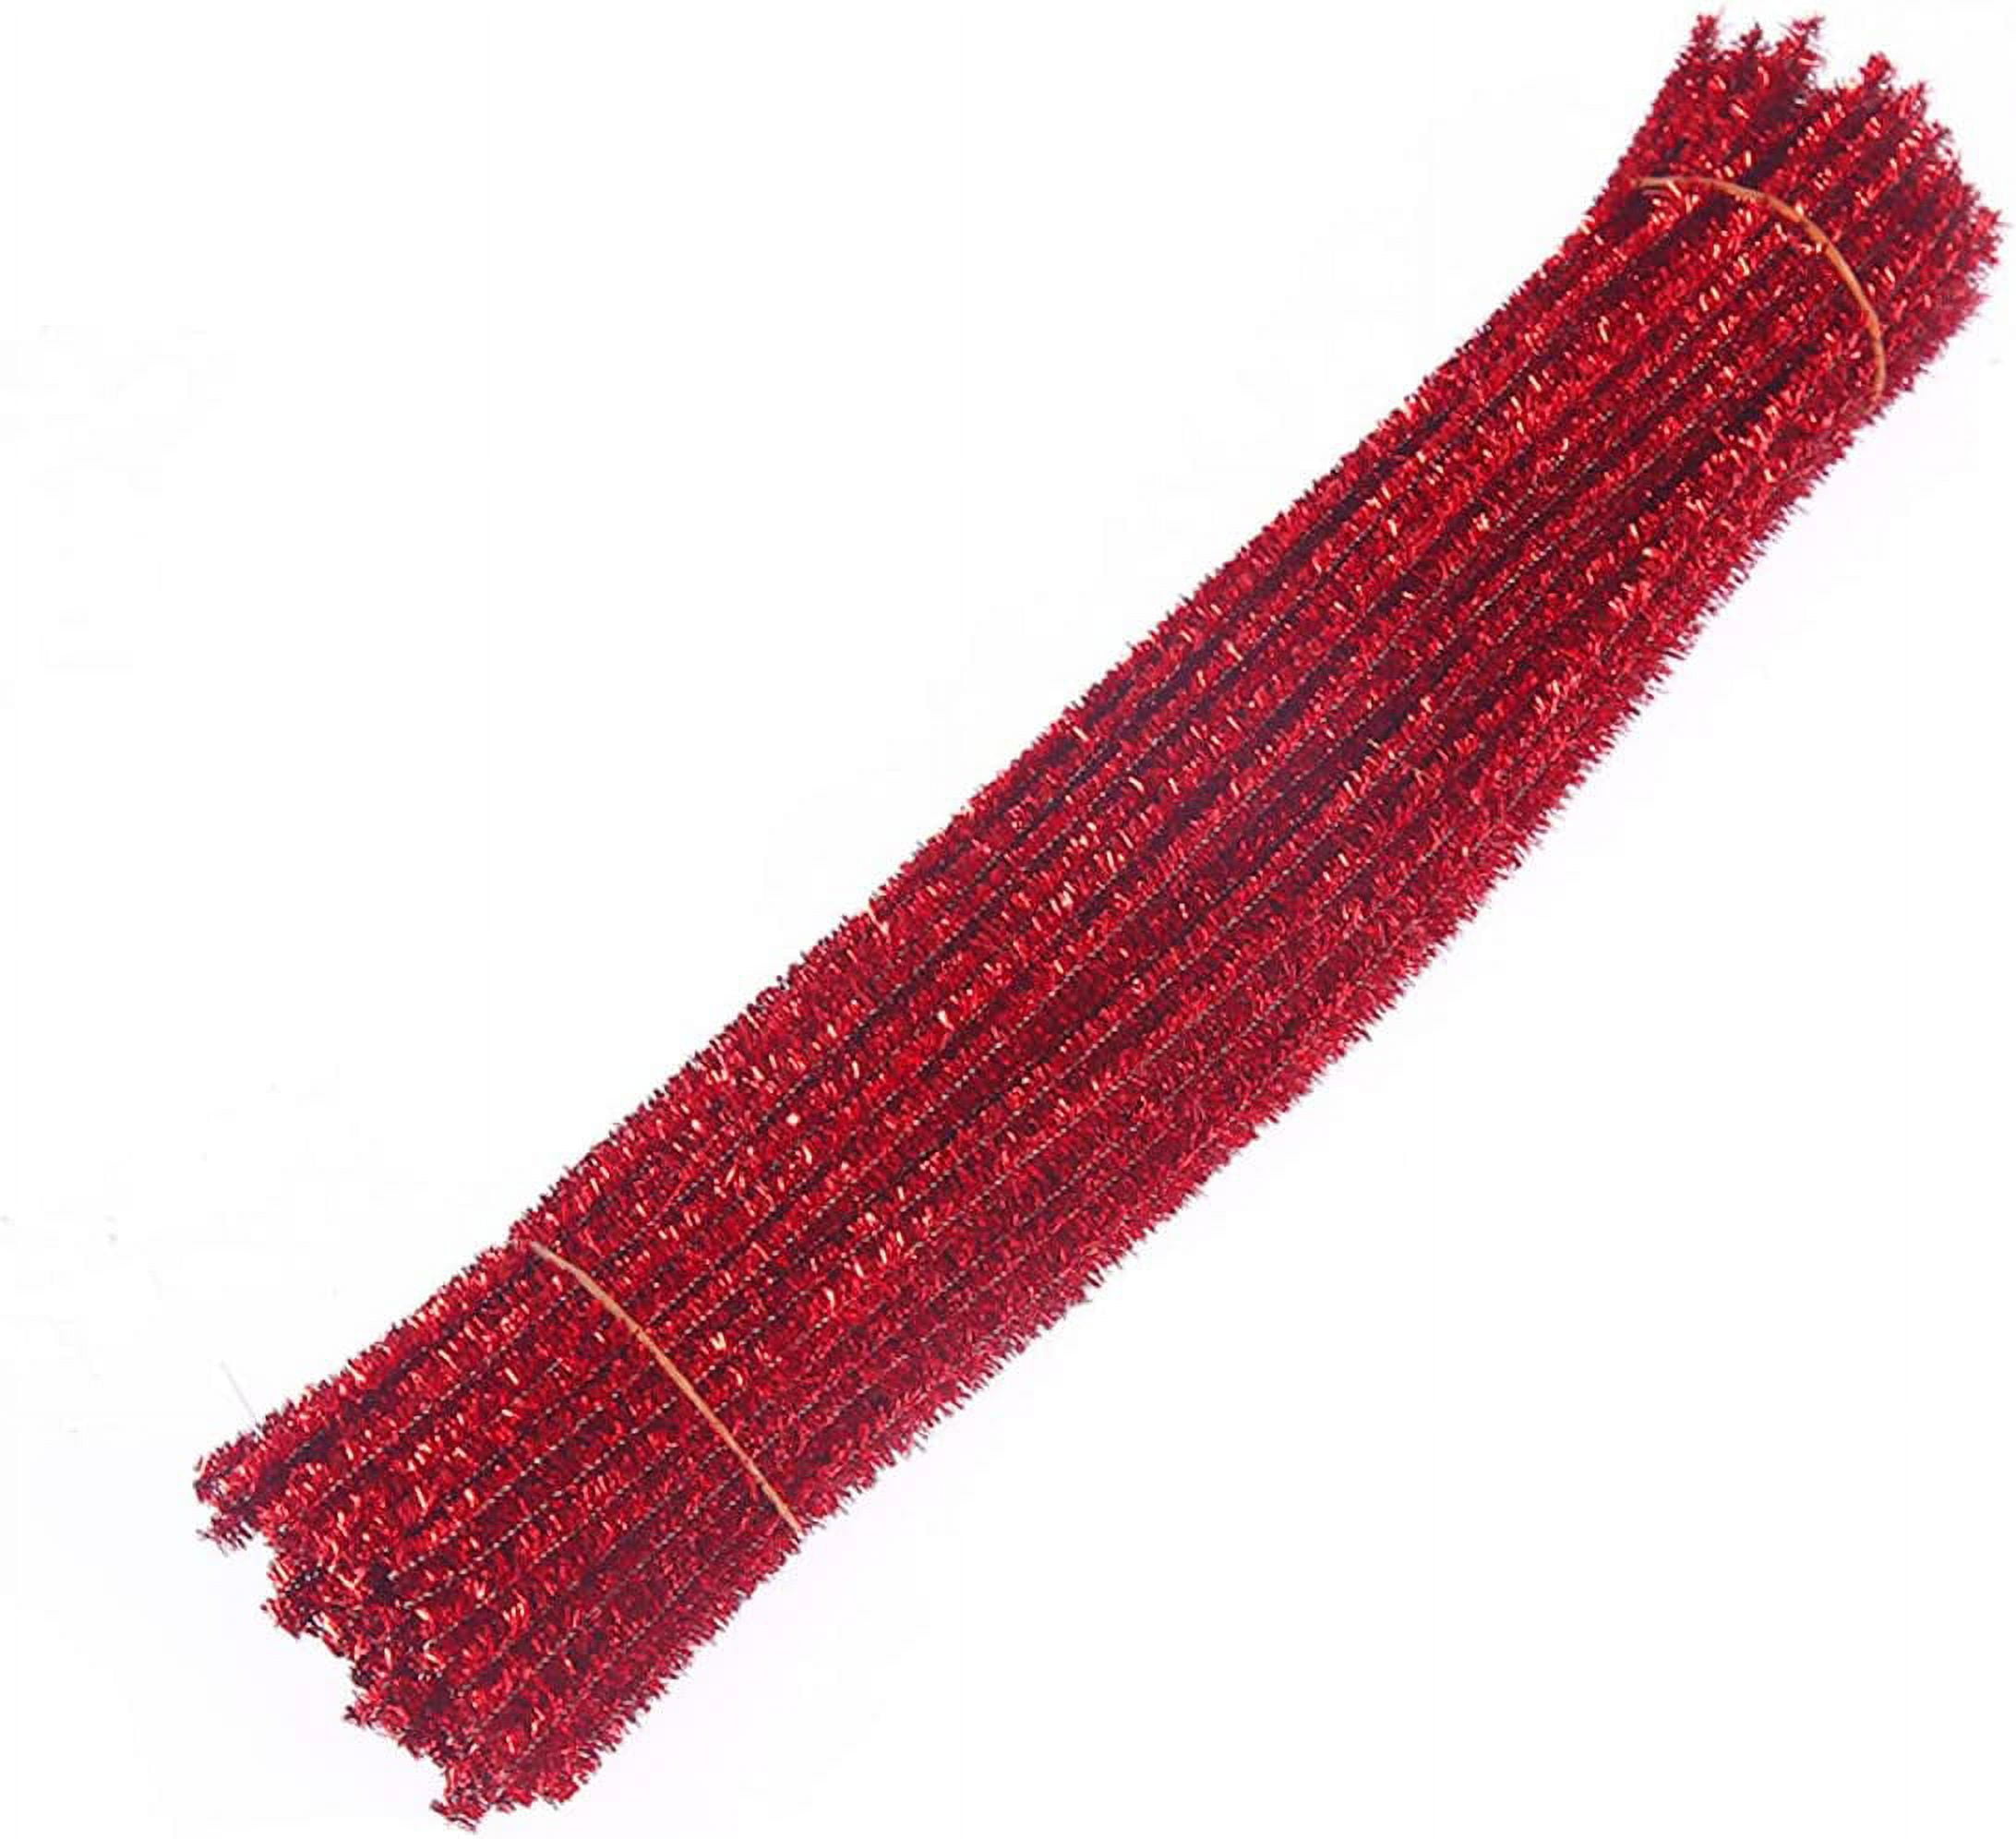 20 Pipe Cleaner Stems: 6mm Chenille Red (50)